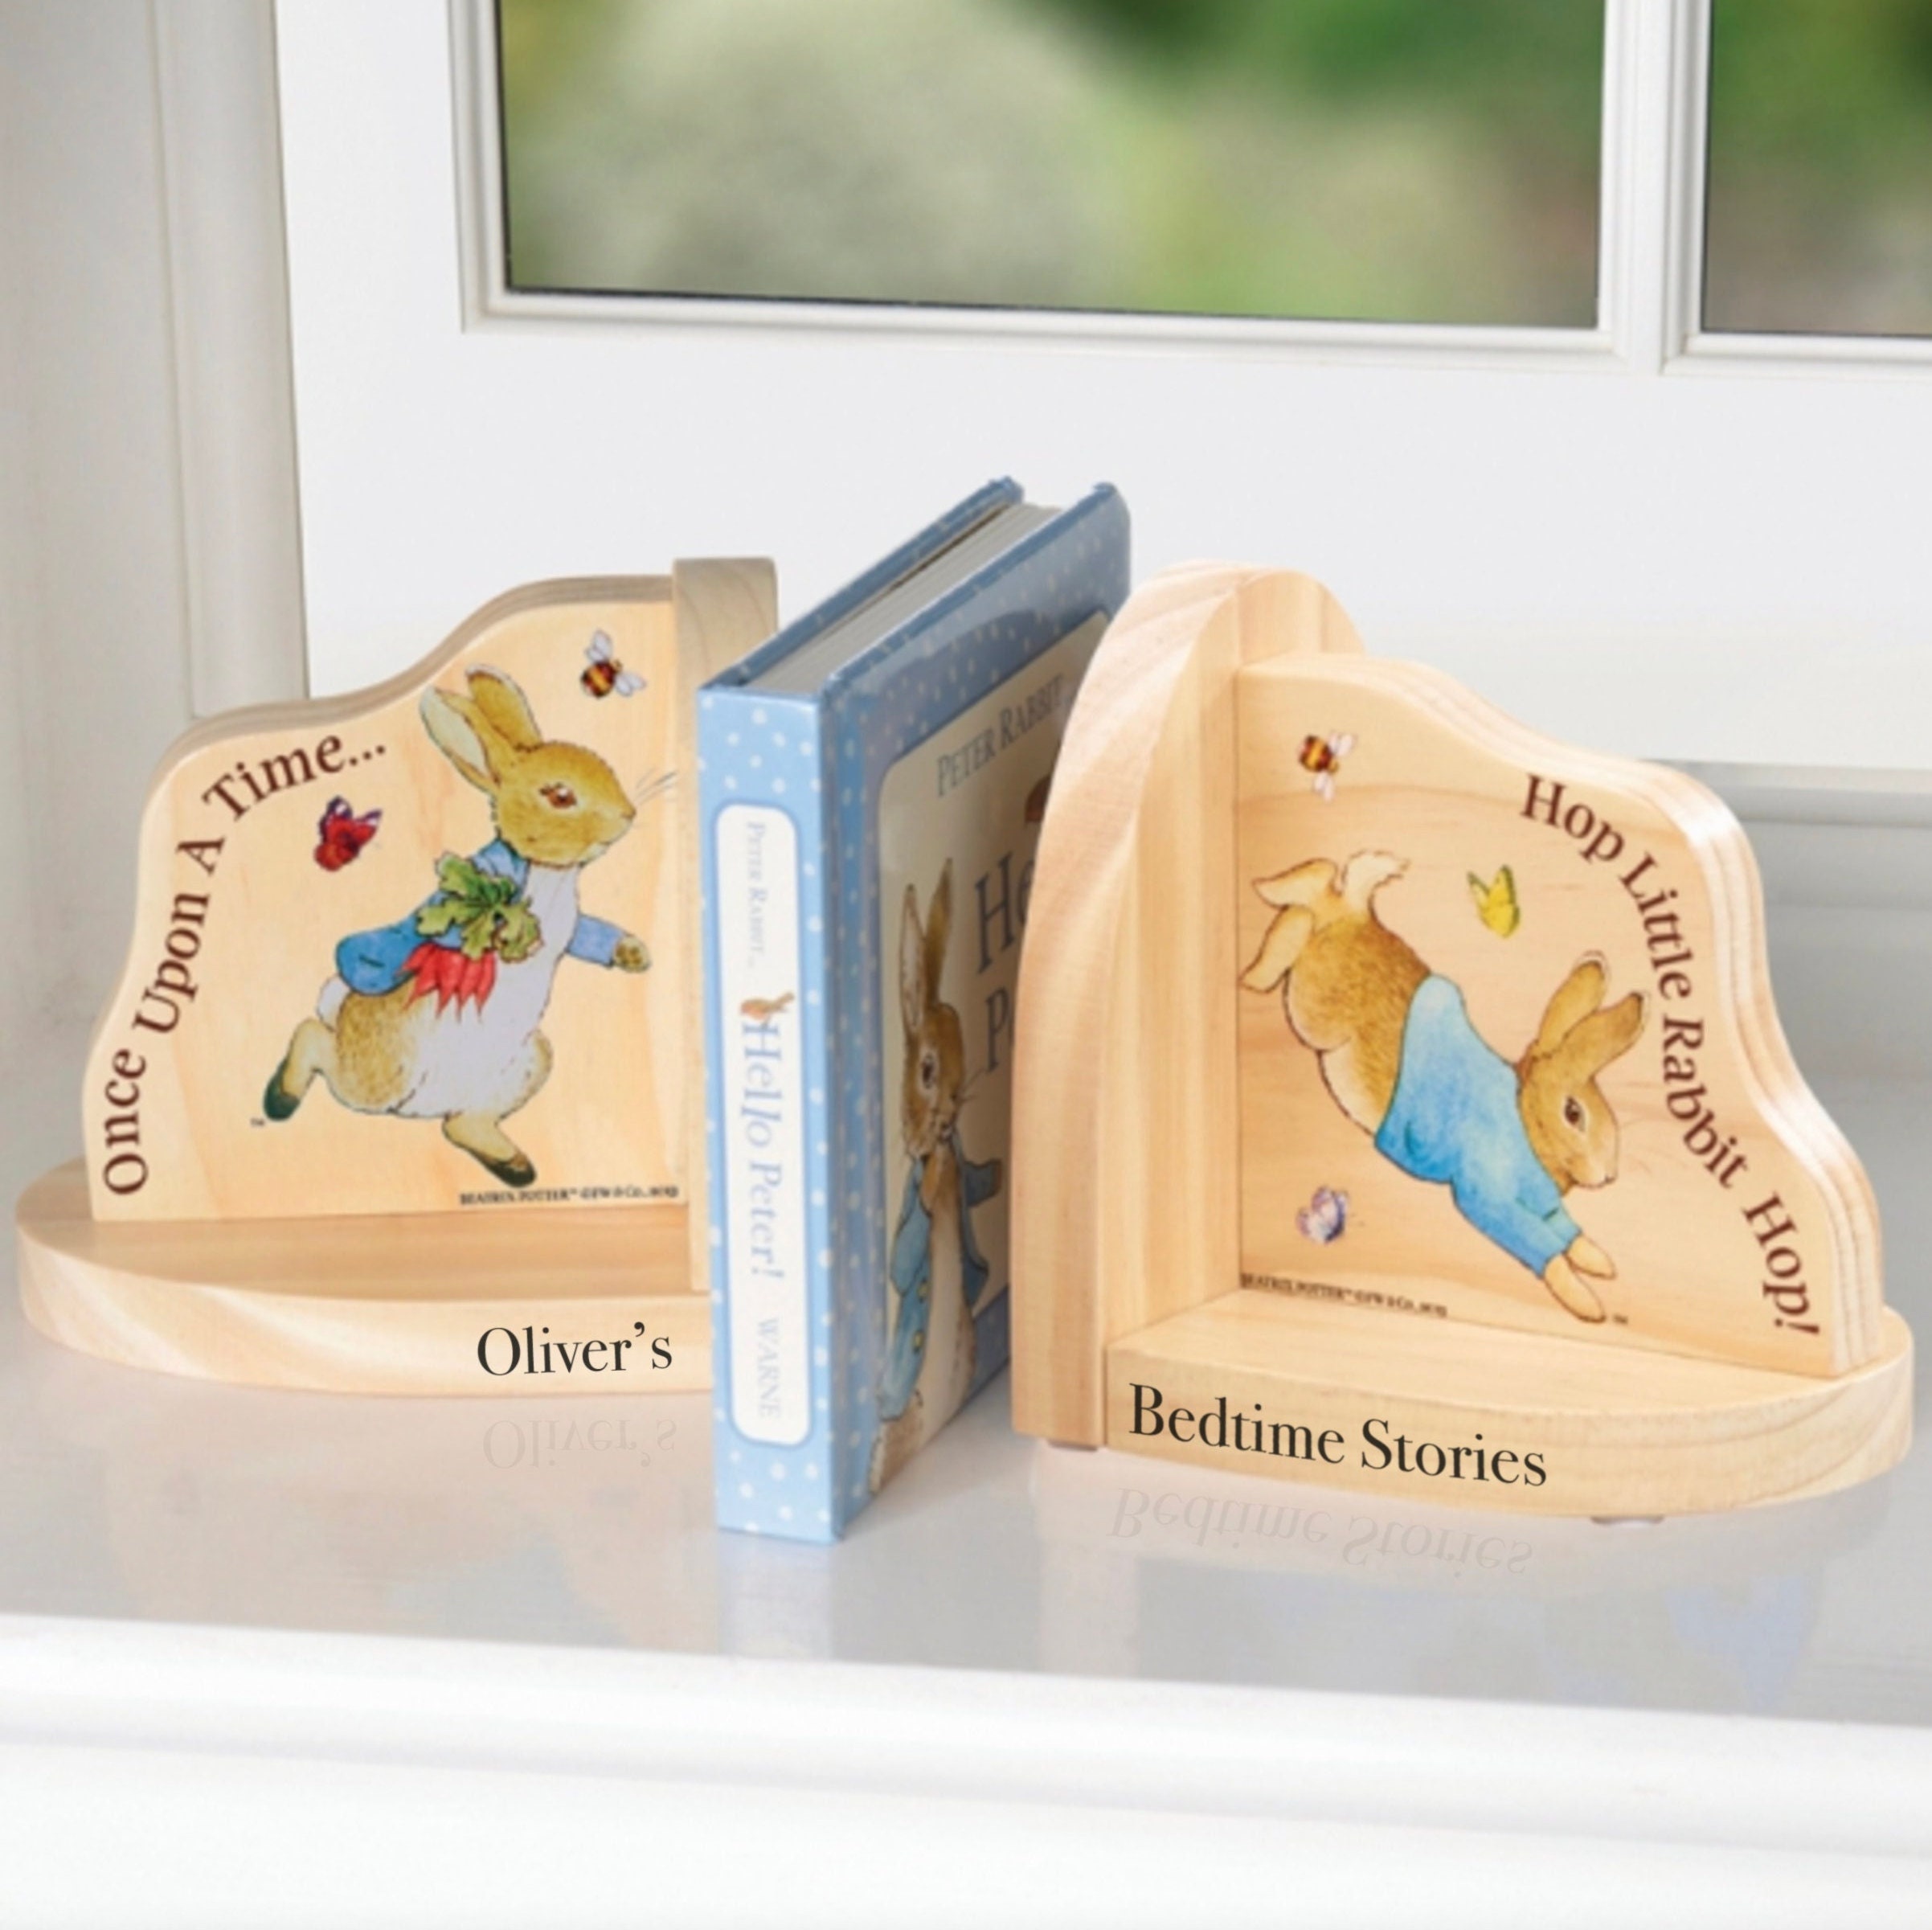 hy Classic Originality Rabbit Design Resin Bookends for Home Office Library Desk Organizer. 